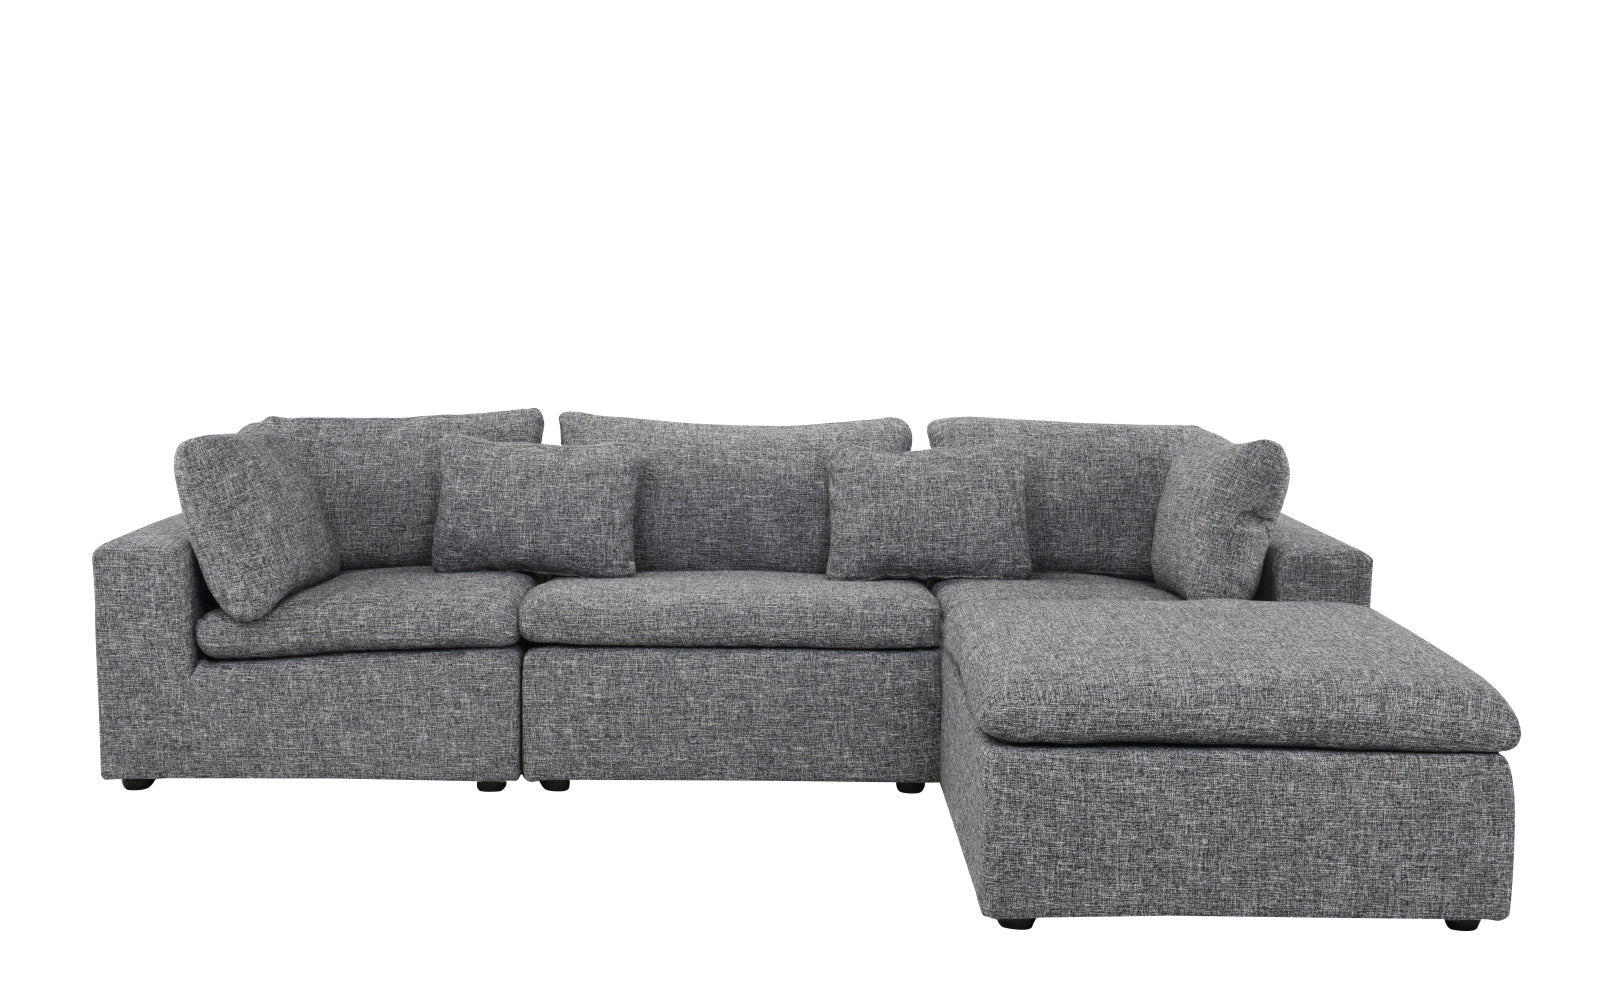 Delano Modern Low Profile Sectional Sofa with Chaise